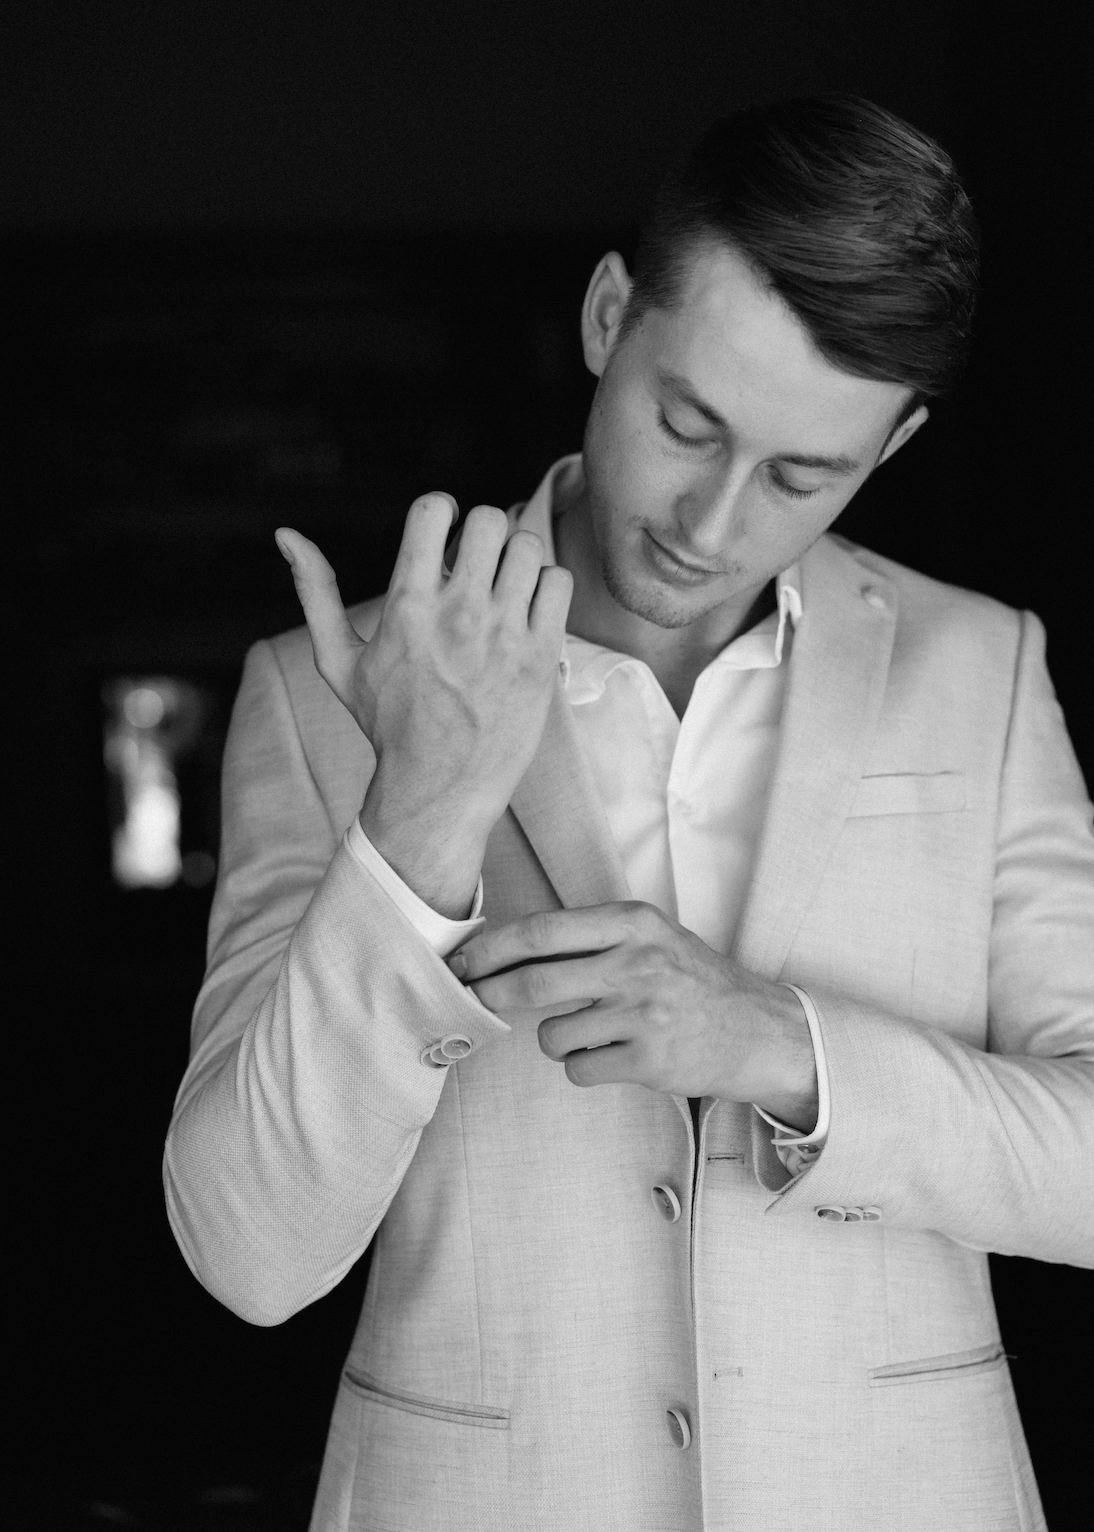 Black and white image of a man adjusting the button on the sleeve of his light-colored suit jacket. He is looking down with a focused expression in a dark background.